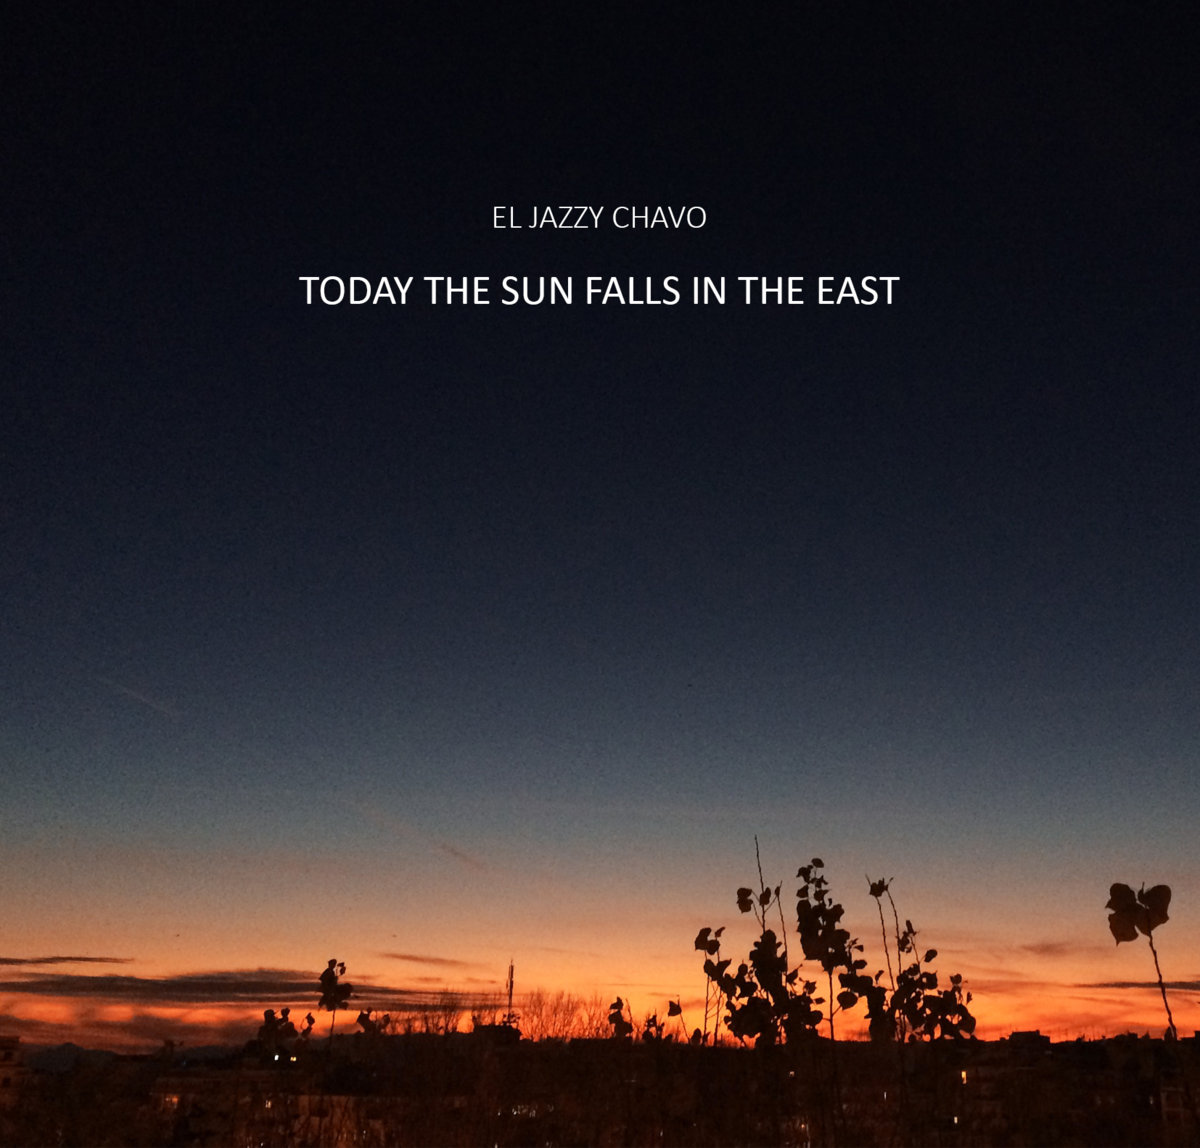 El_jazzy_chavo_presenta_today_the_sun_falls_in_the_east